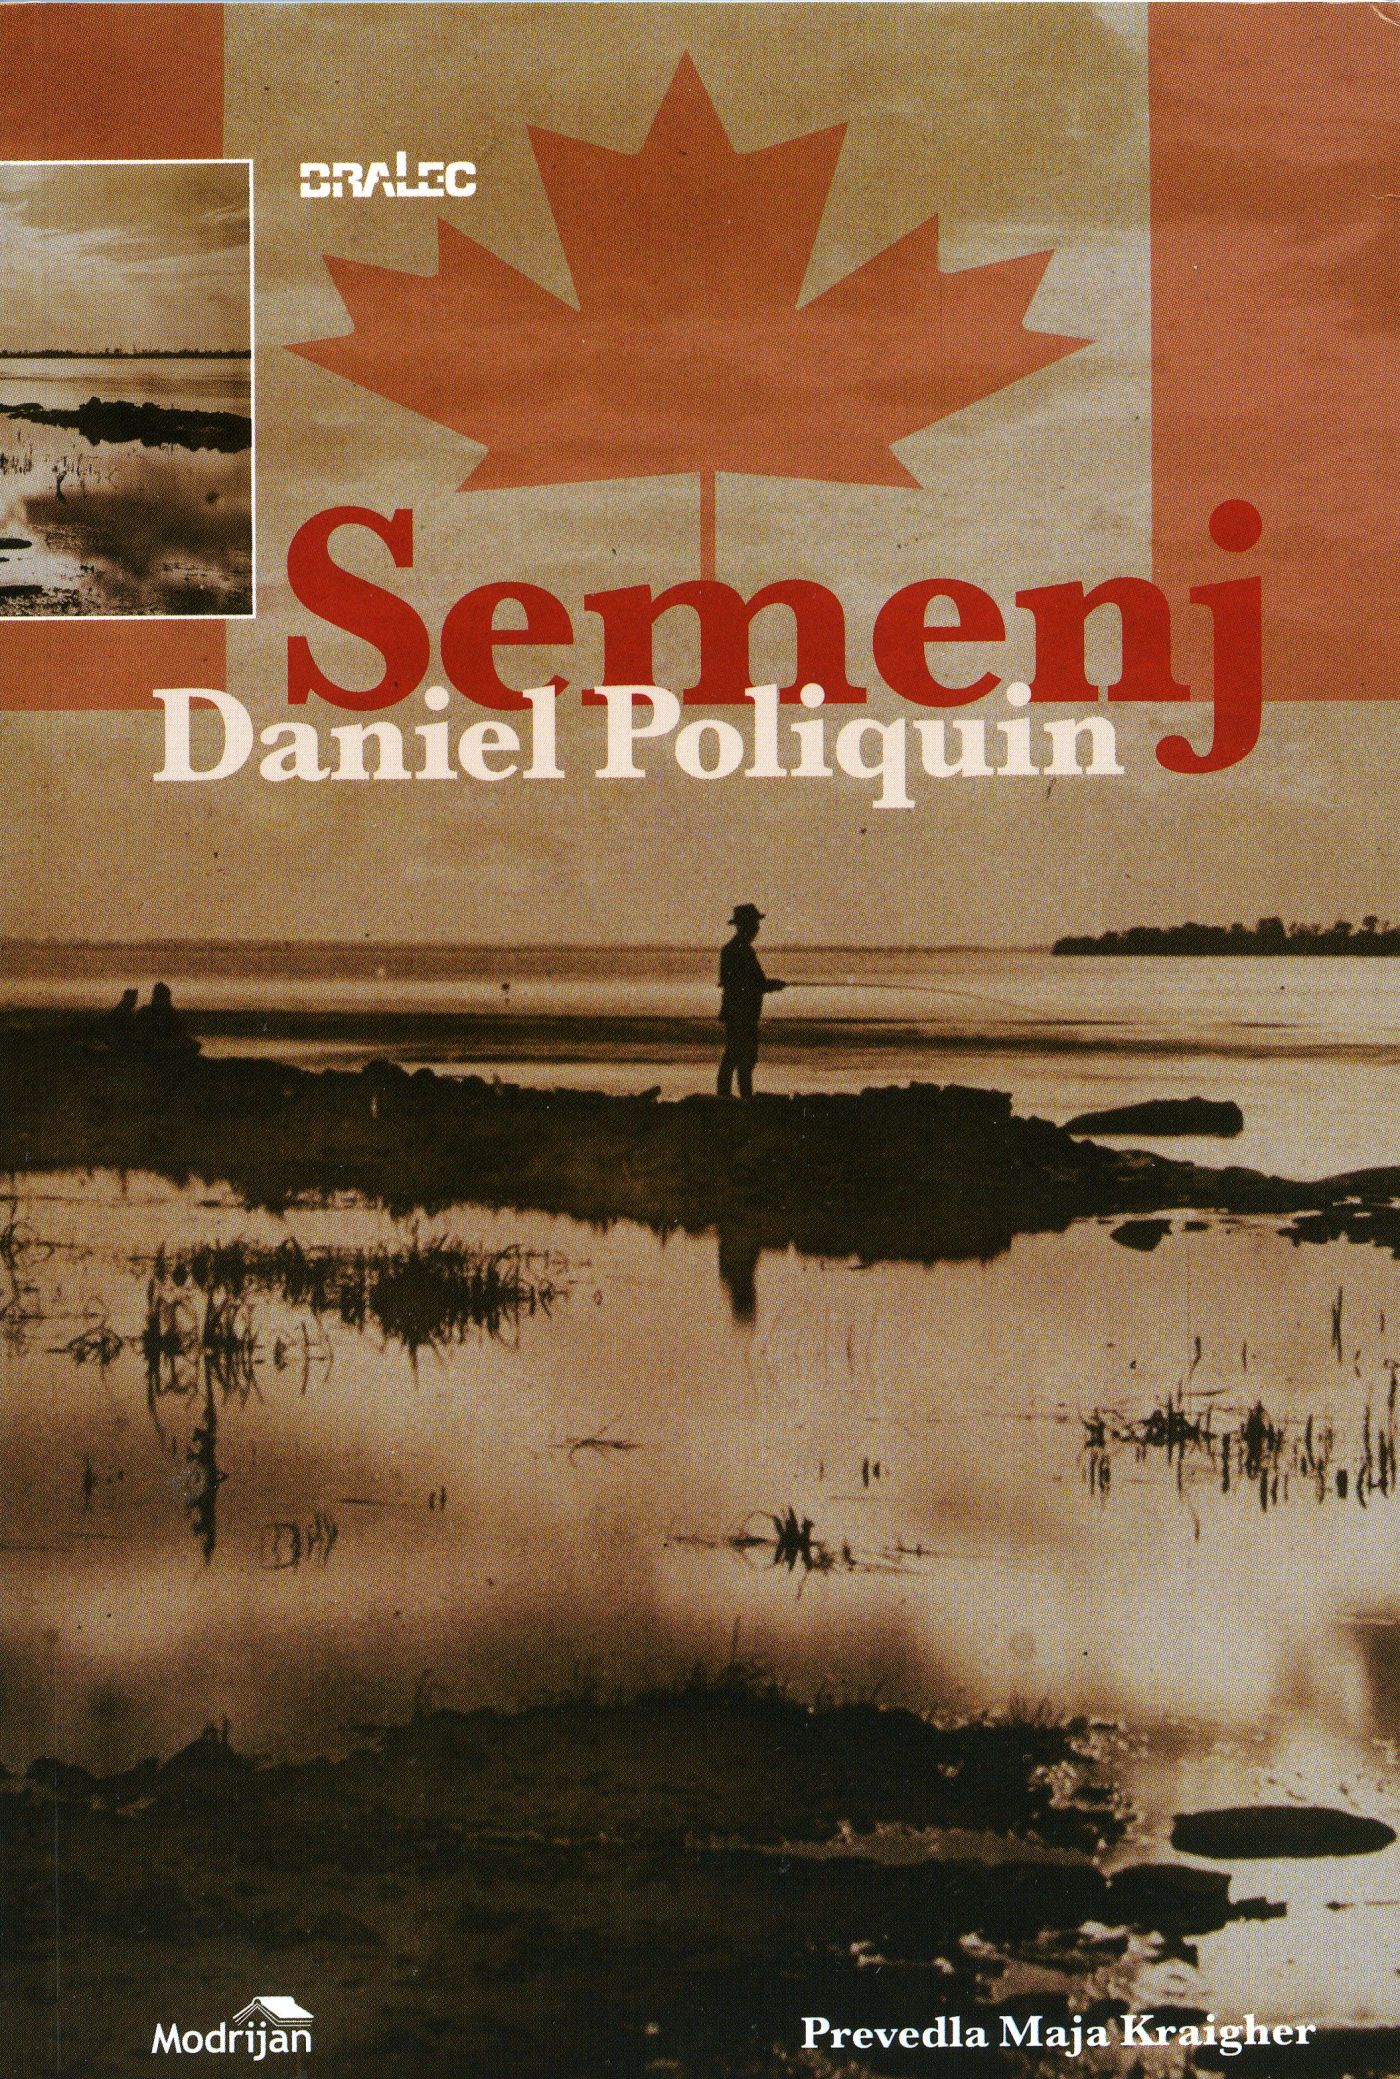 Cover of a Slovenian book. It contains a backlit photograph of the silhouette of a man fishing at the edge of a body of water. Superimposed on the photograph, a Canadian flag, along with the title in red and the name of the author in white. More information, in smaller print, at the bottom of the page.